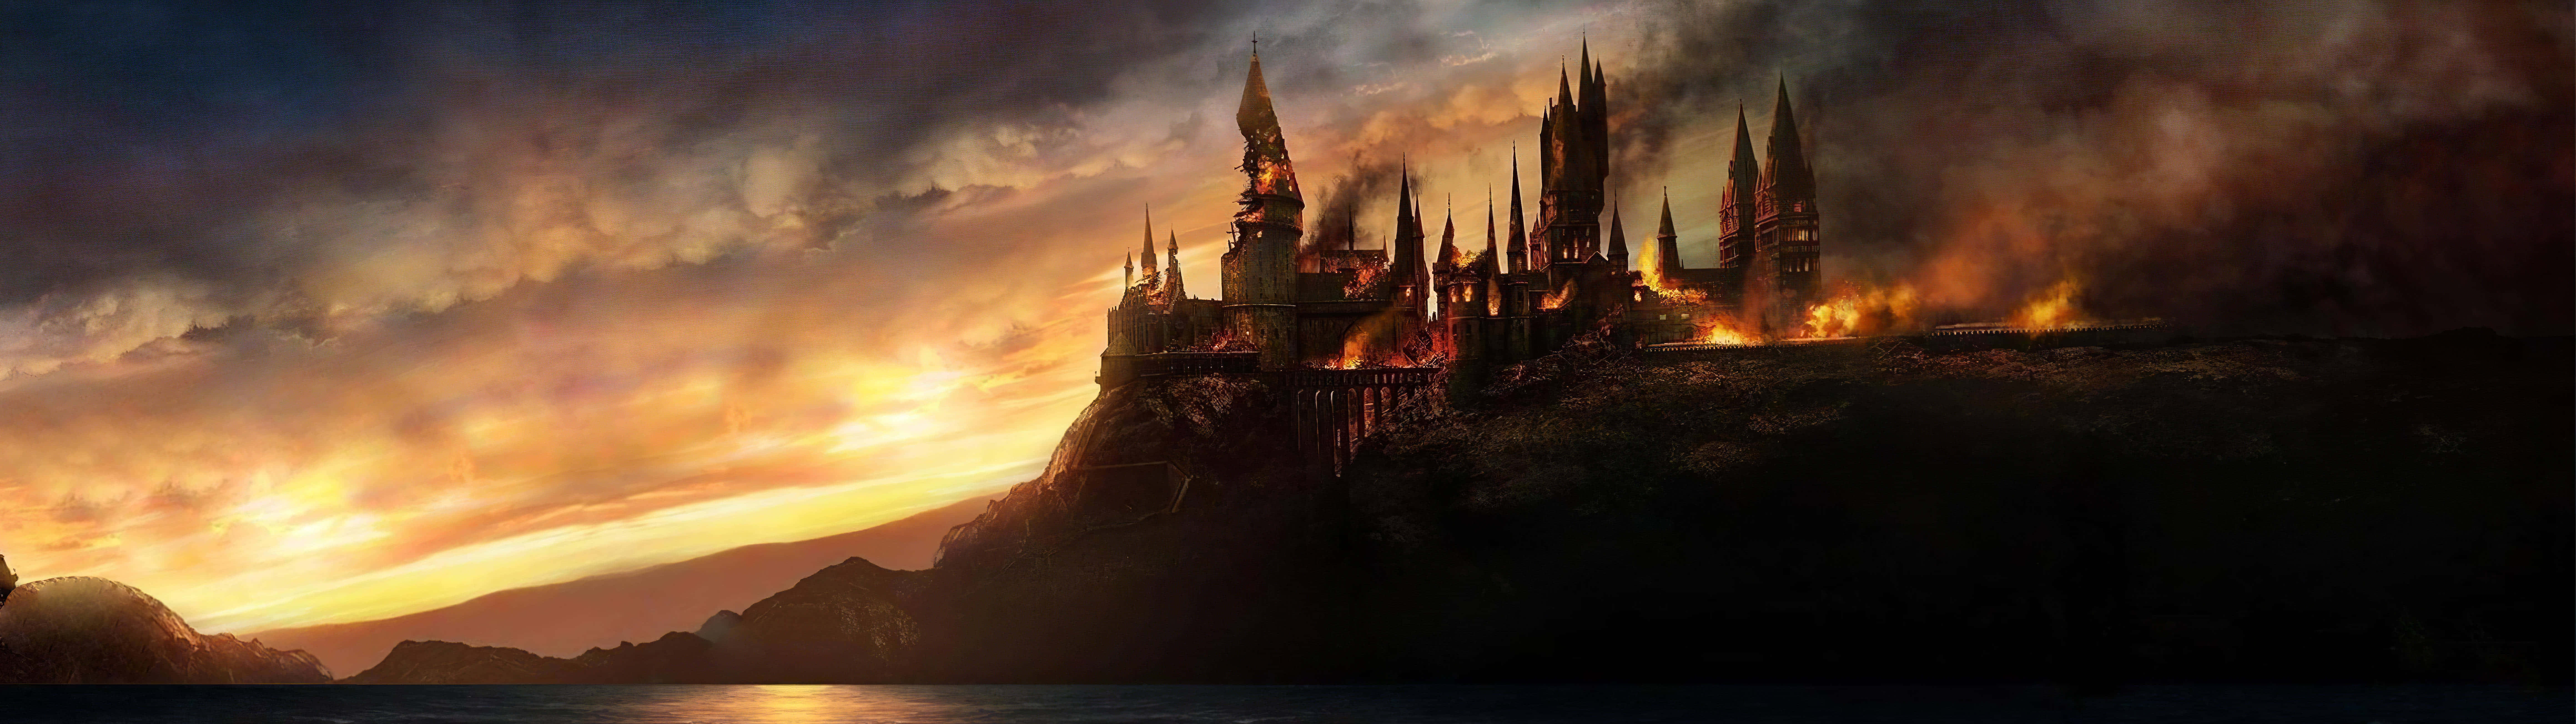 Epic_ Castle_ Sunset_ Fire_ Panorama Wallpaper